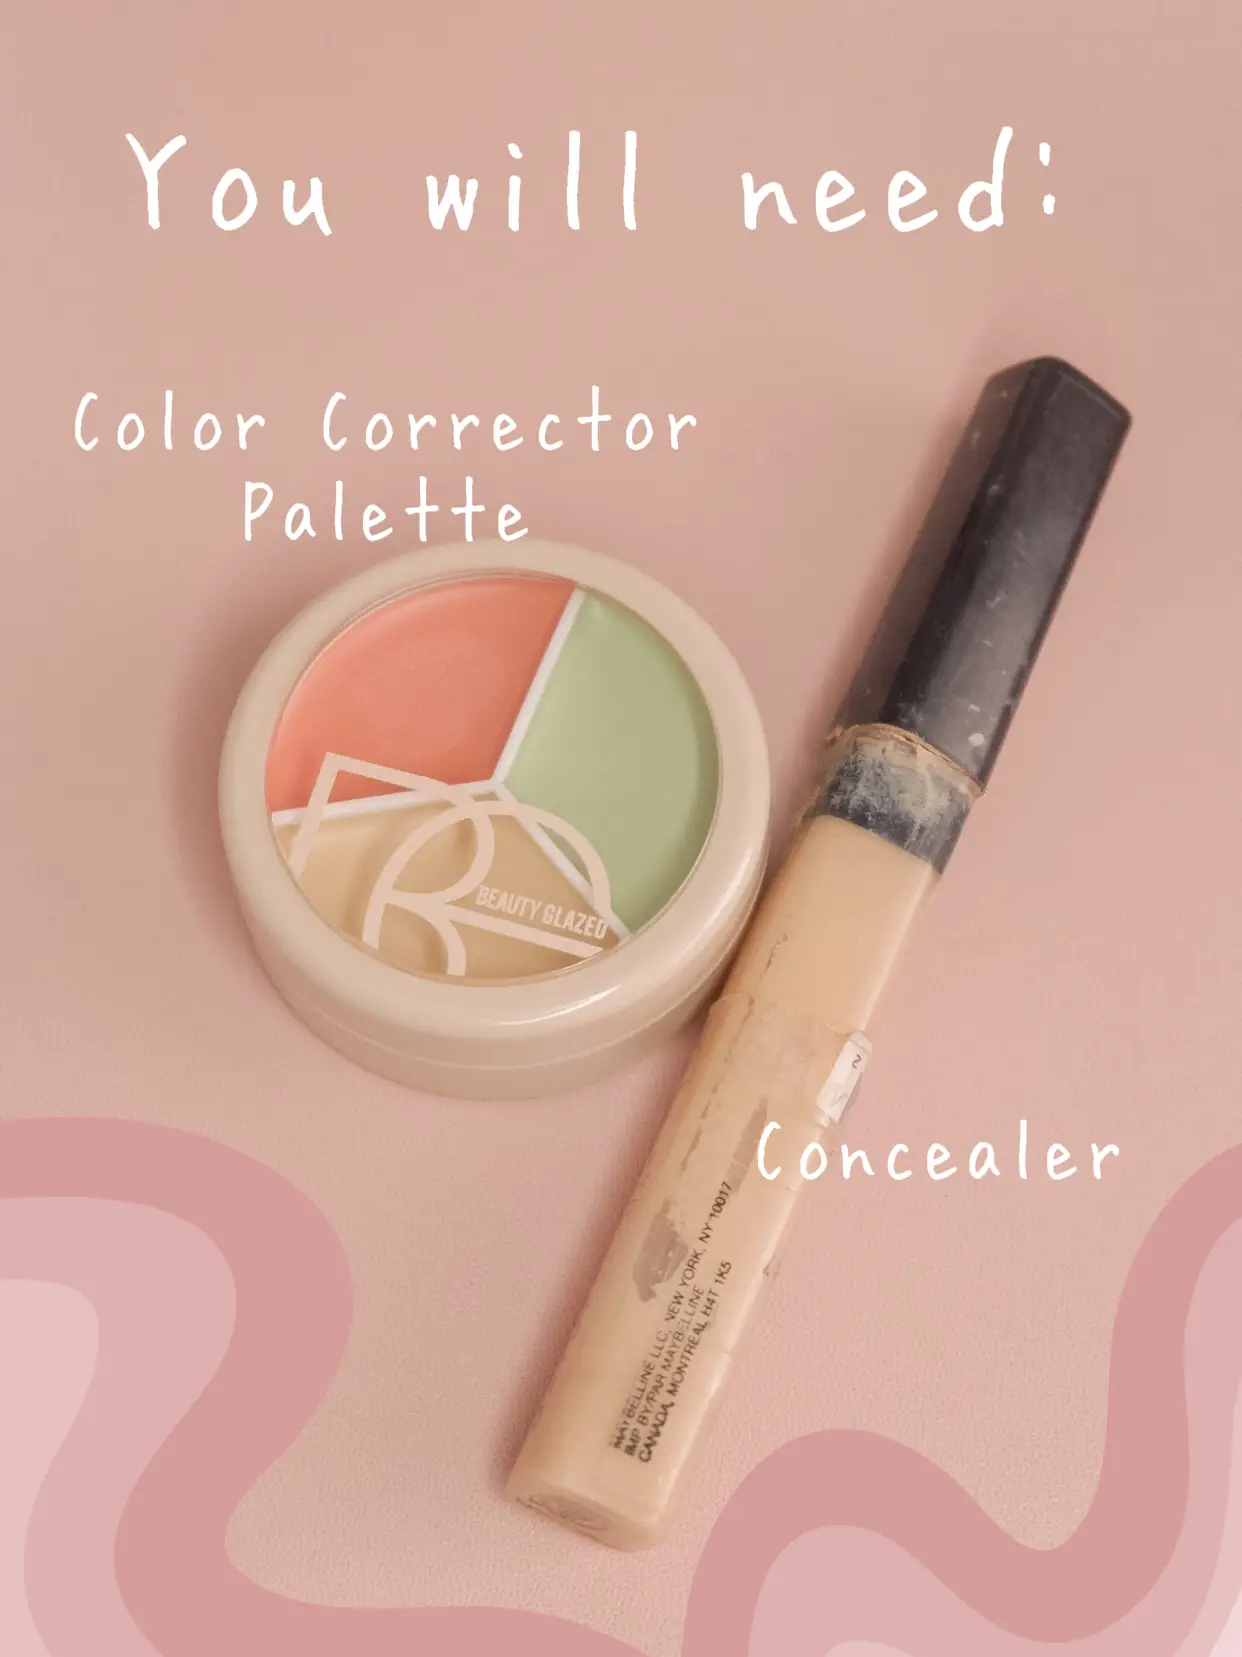 posted Gallery Dark Circles? Richelle Color to Correct How | | by Lemon8